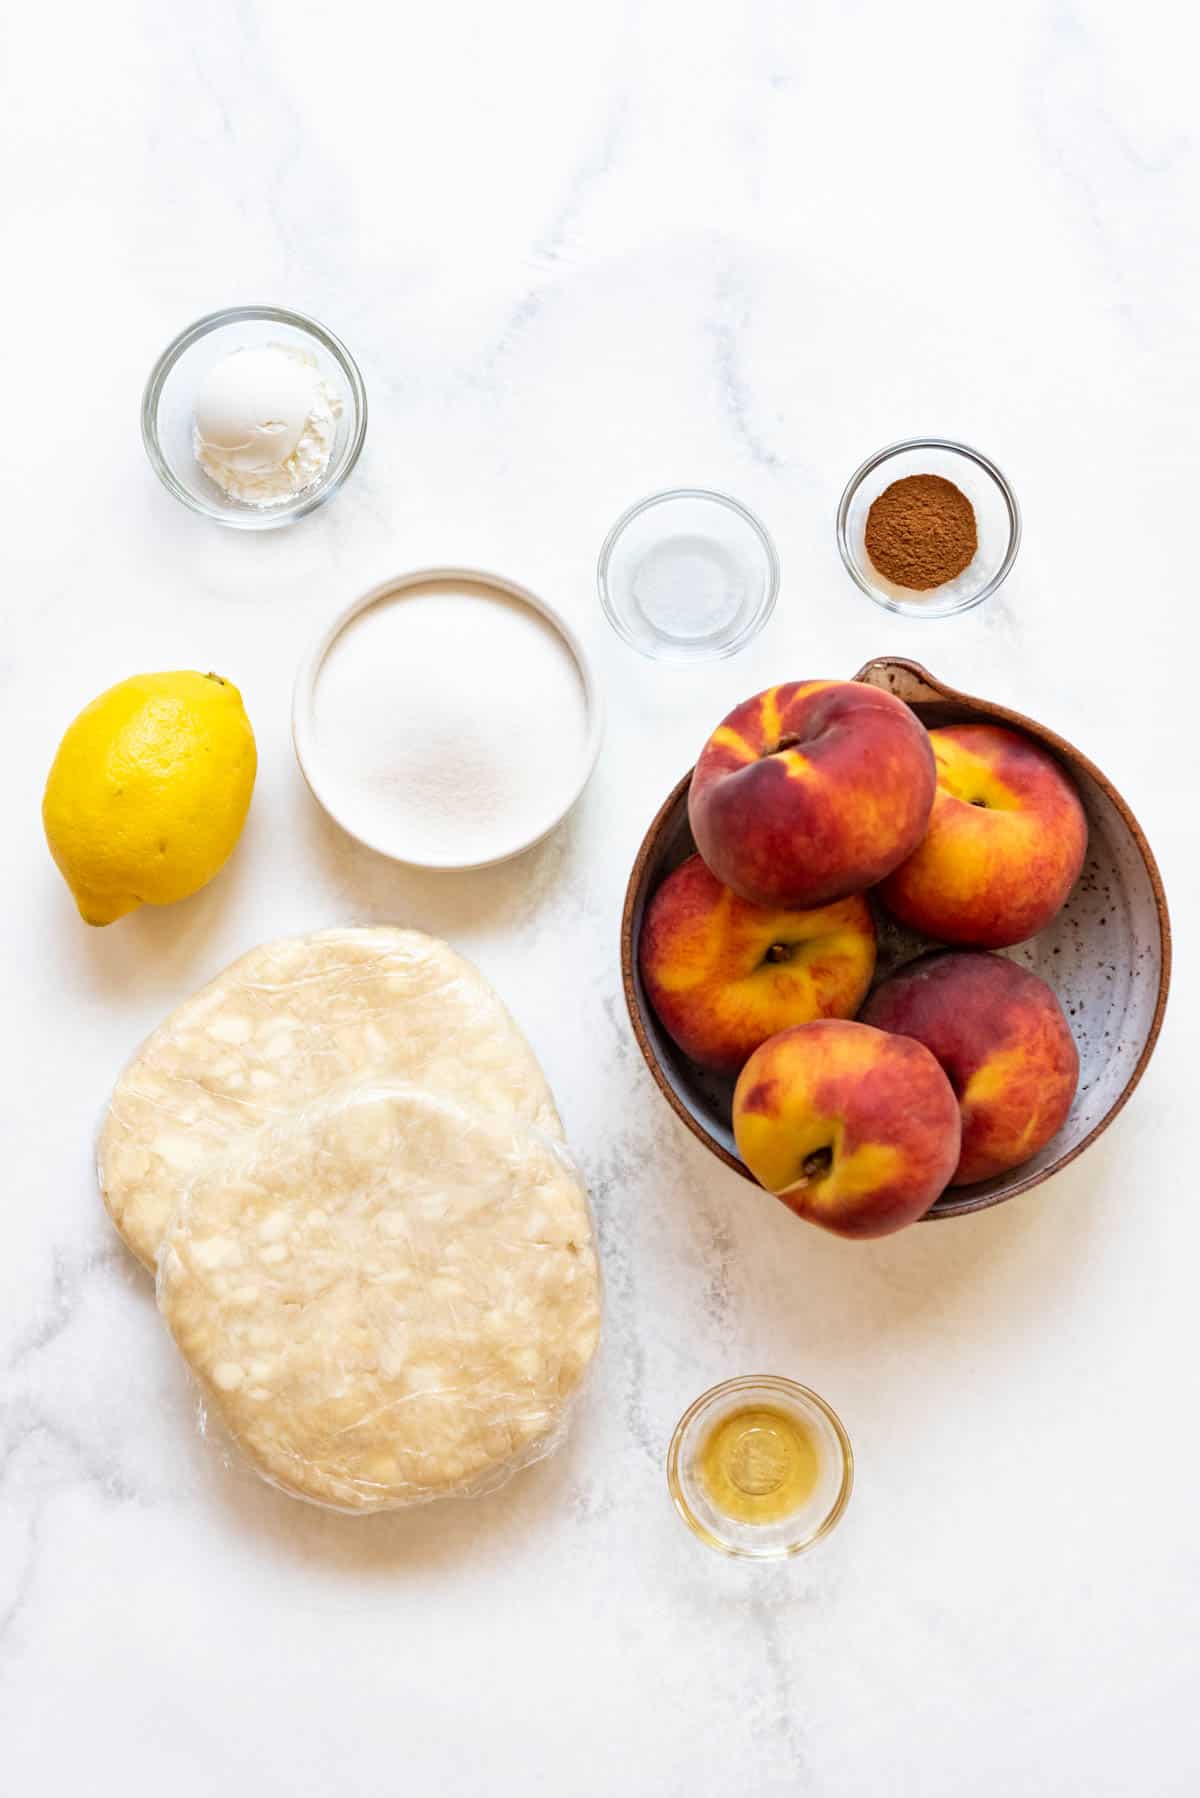 Ingredients for peach hand pies.